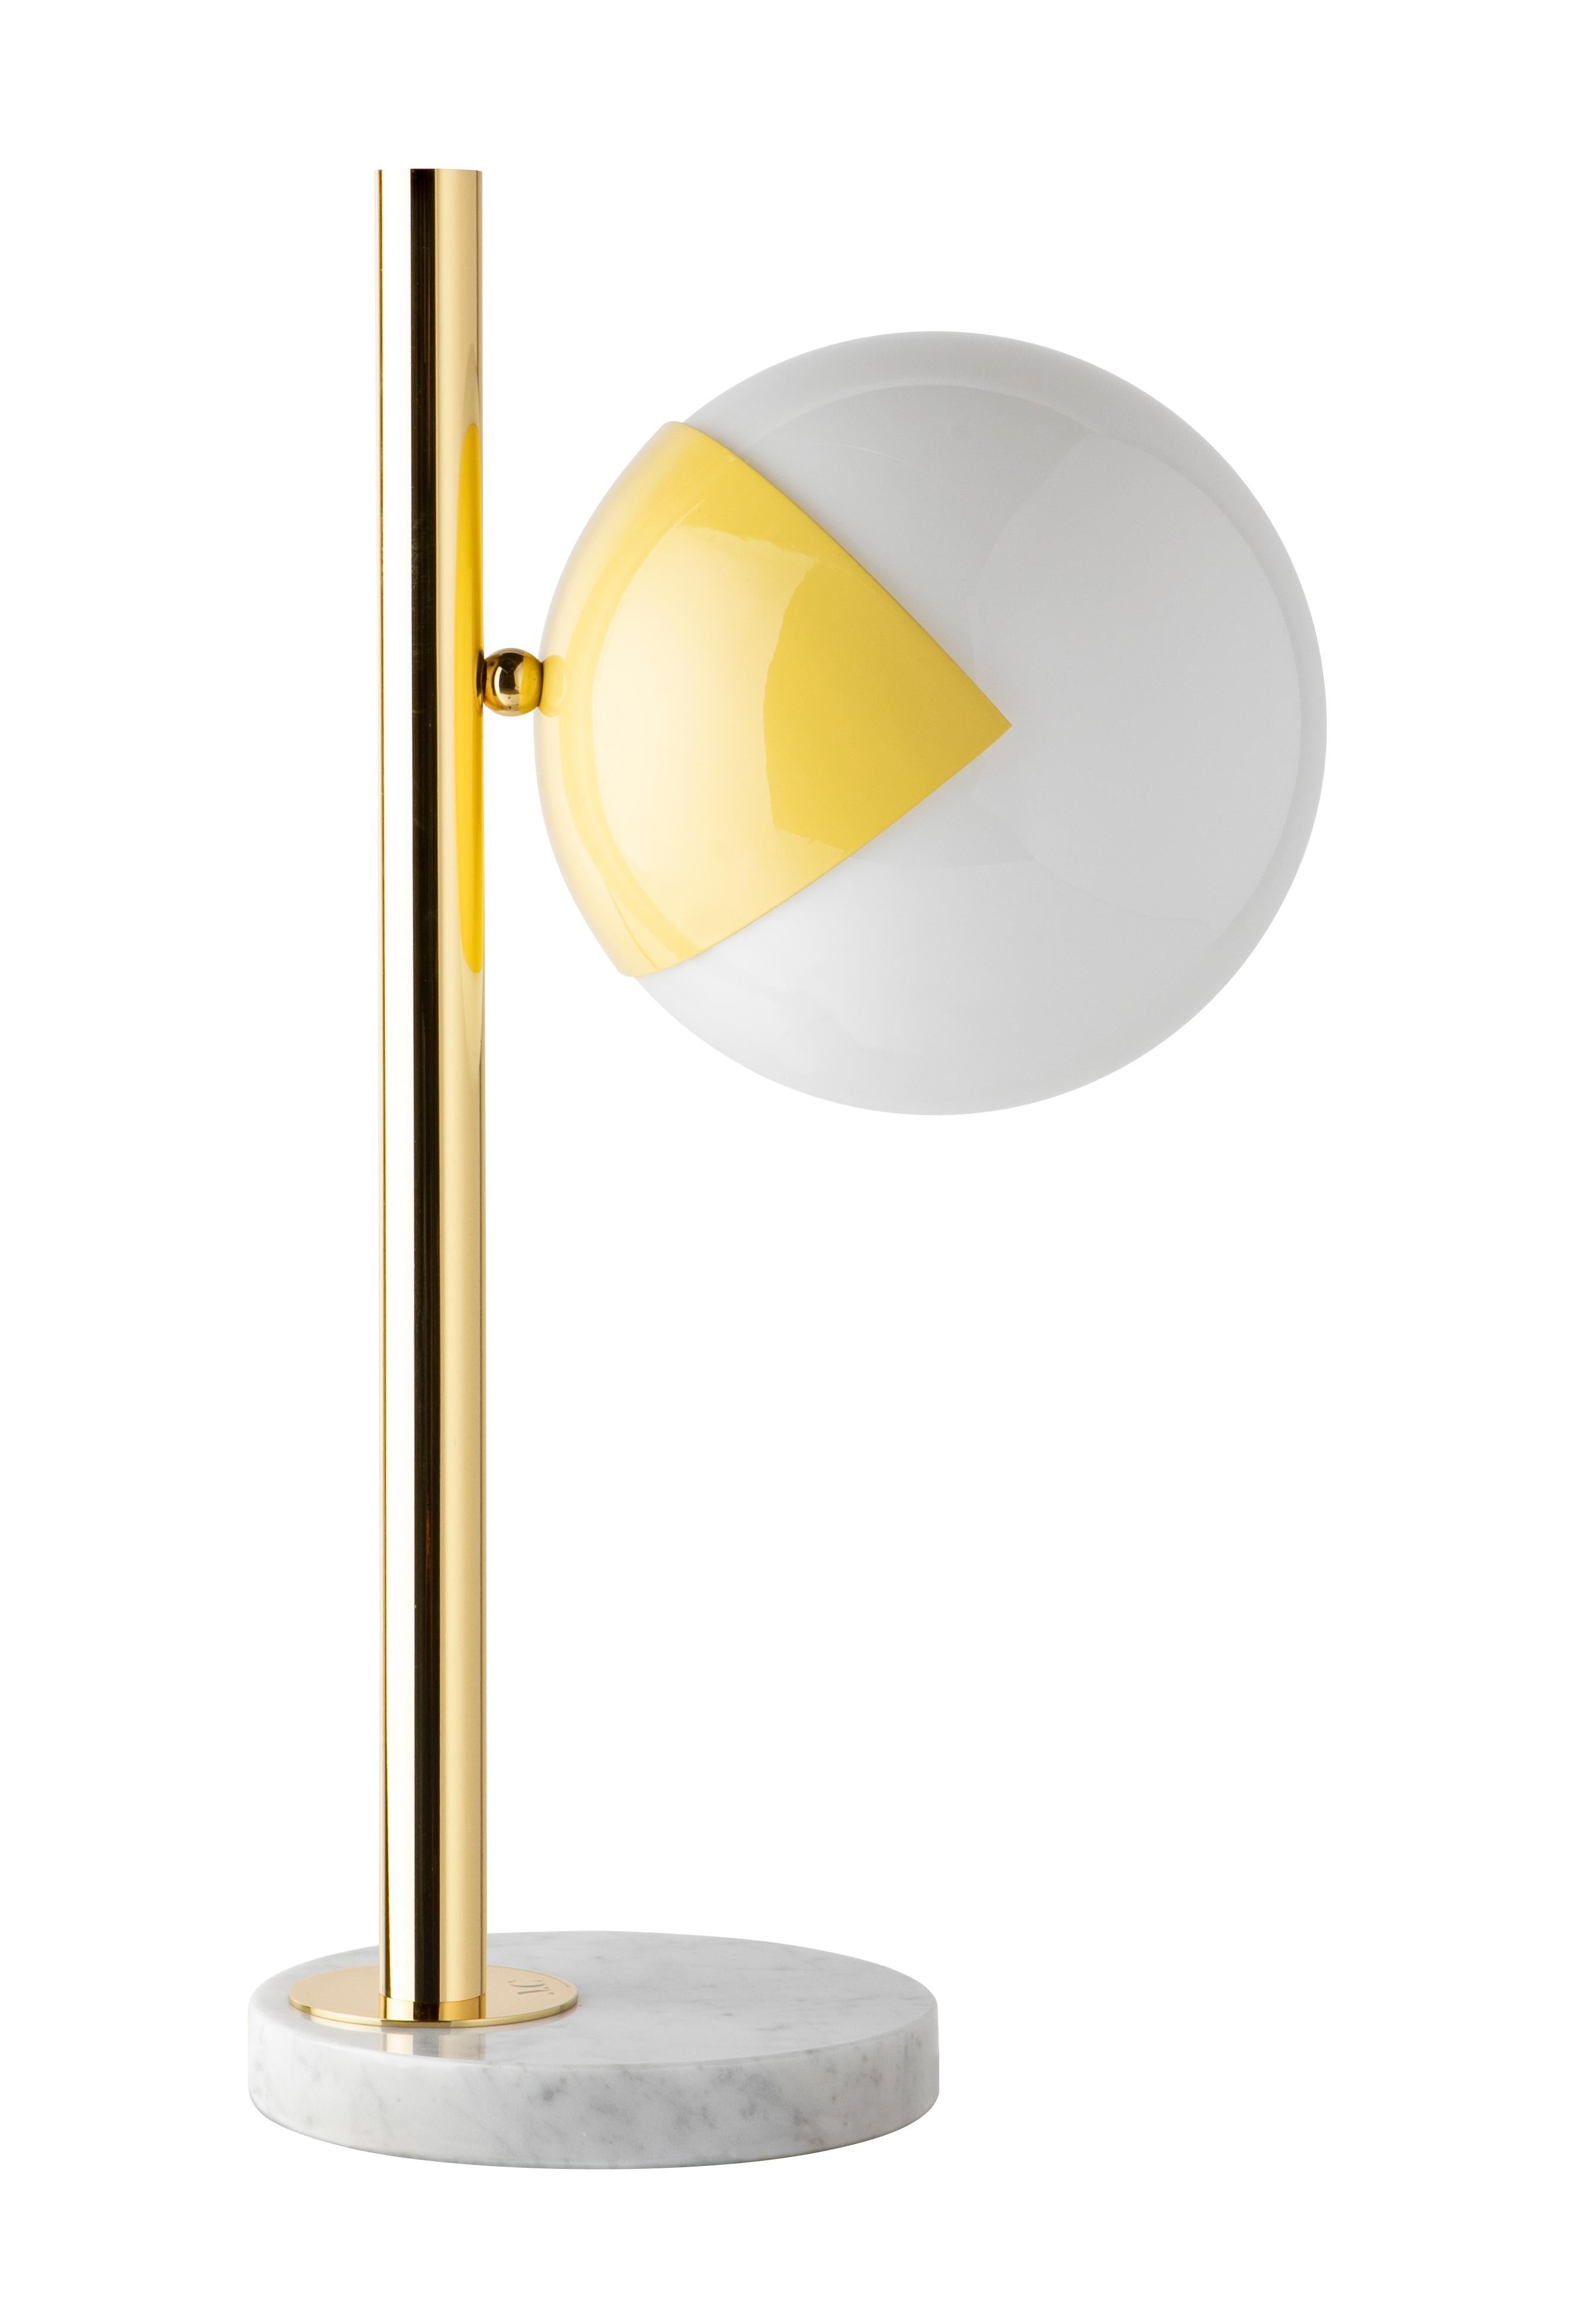 Green table lamp pop-up dimmable by Magic Circus Editions
Dimensions: Ø 22 x 30 x 53 cm 
Materials: Carrara marble base, smooth brass tube, glossy mouth blown glass
Also non-dimmable version available. 

All our lamps can be wired according to